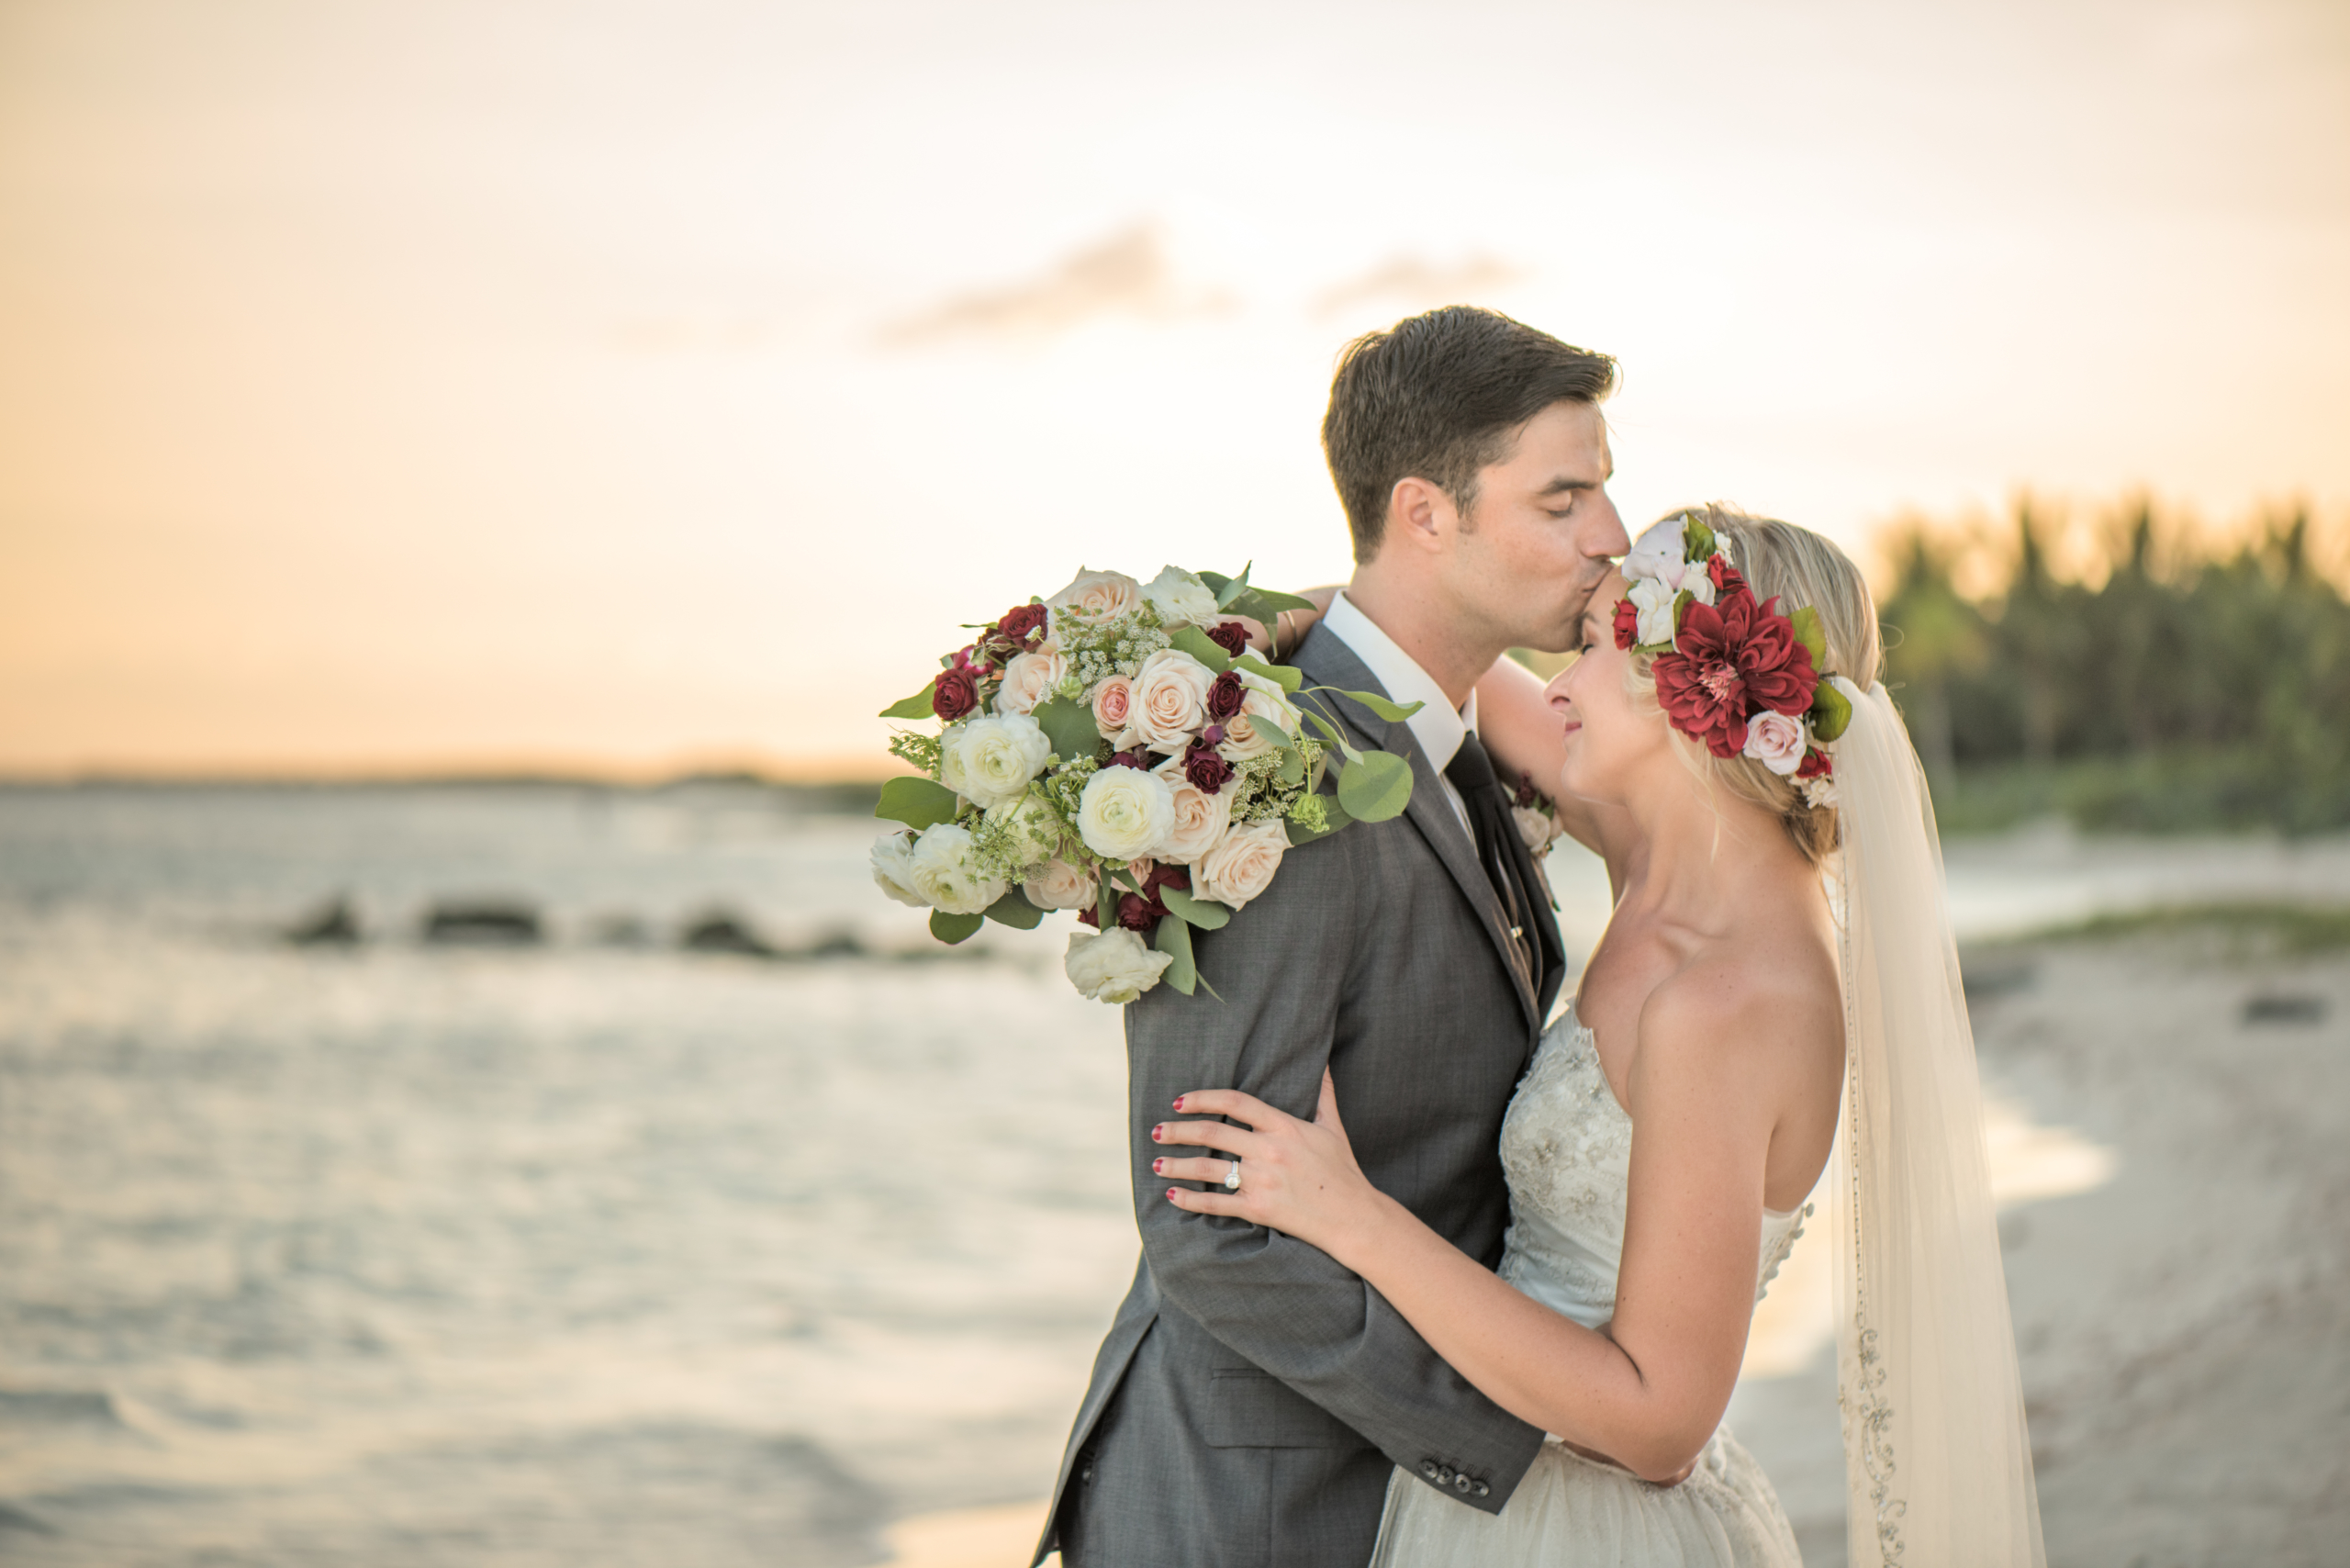 Groom kisses his new bride on the forehead as they embrace on the beach in Tulum with the sun setting in the background. The bride holds a beautiful bouquet